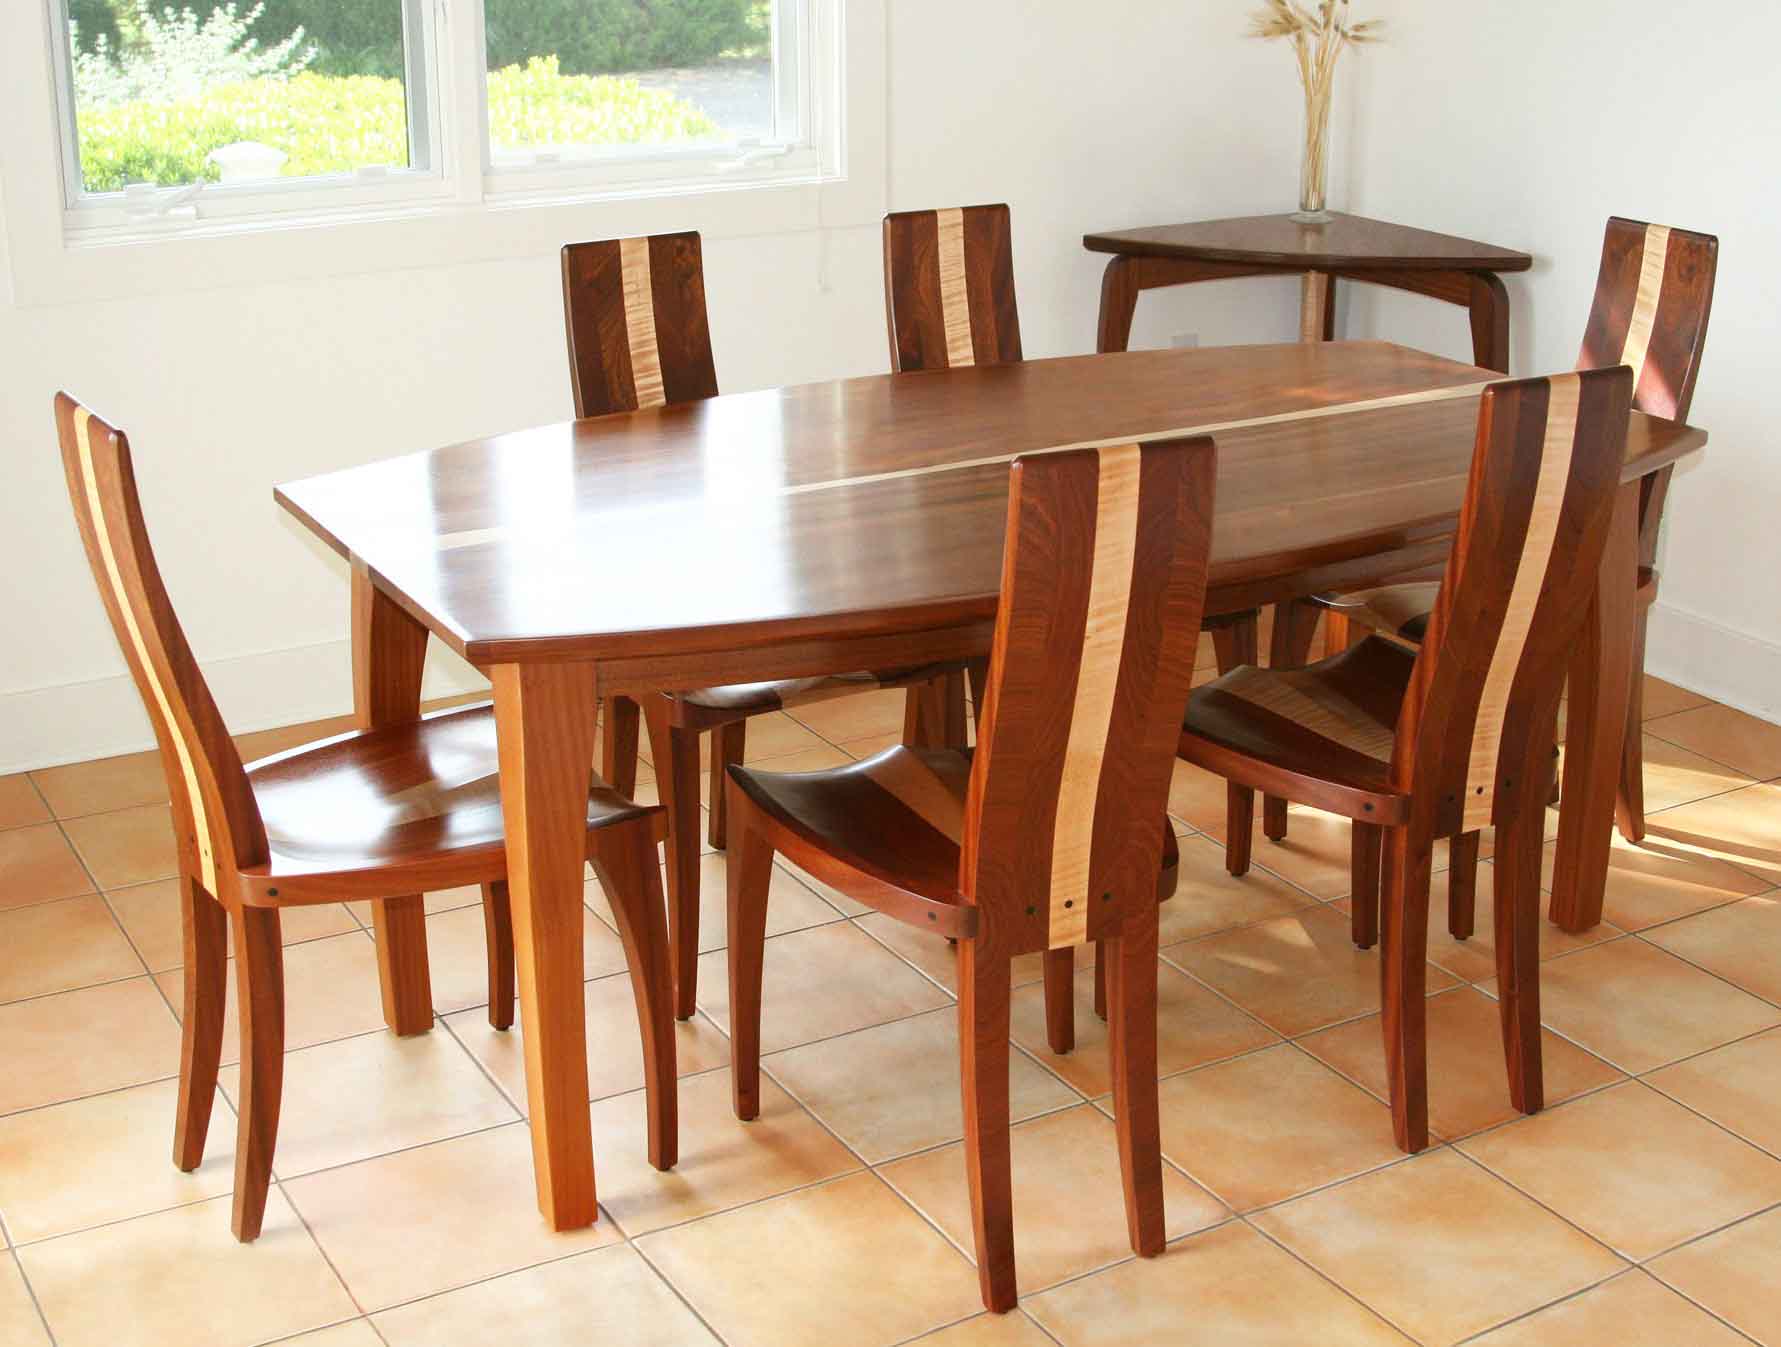 Dining Table in Kampala Uganda. Modern Dining Table Furniture Design And Manufacturing in Uganda. Product Available On Order Placement. Modern Trendy Dining Table Design For Indoor, Outdoor And Lounge Space. Materials Used In Making Our Products: Hardwood, Softwood, Boardwood. Fabric Material: Leather, Cotton, Linen, Velvet, Polyester, Wool, Silk, Olefin Fiber, Nylon, Rayon, Velour Faux Leather Fabric. Erimu Company Ltd Uganda For All: Interior Design Services in Uganda, Furniture Manufacturing And Carpentry Services in Kampala Uganda. We Make/Manufacture Wood Products Based On Client Concept Design. Ugabox